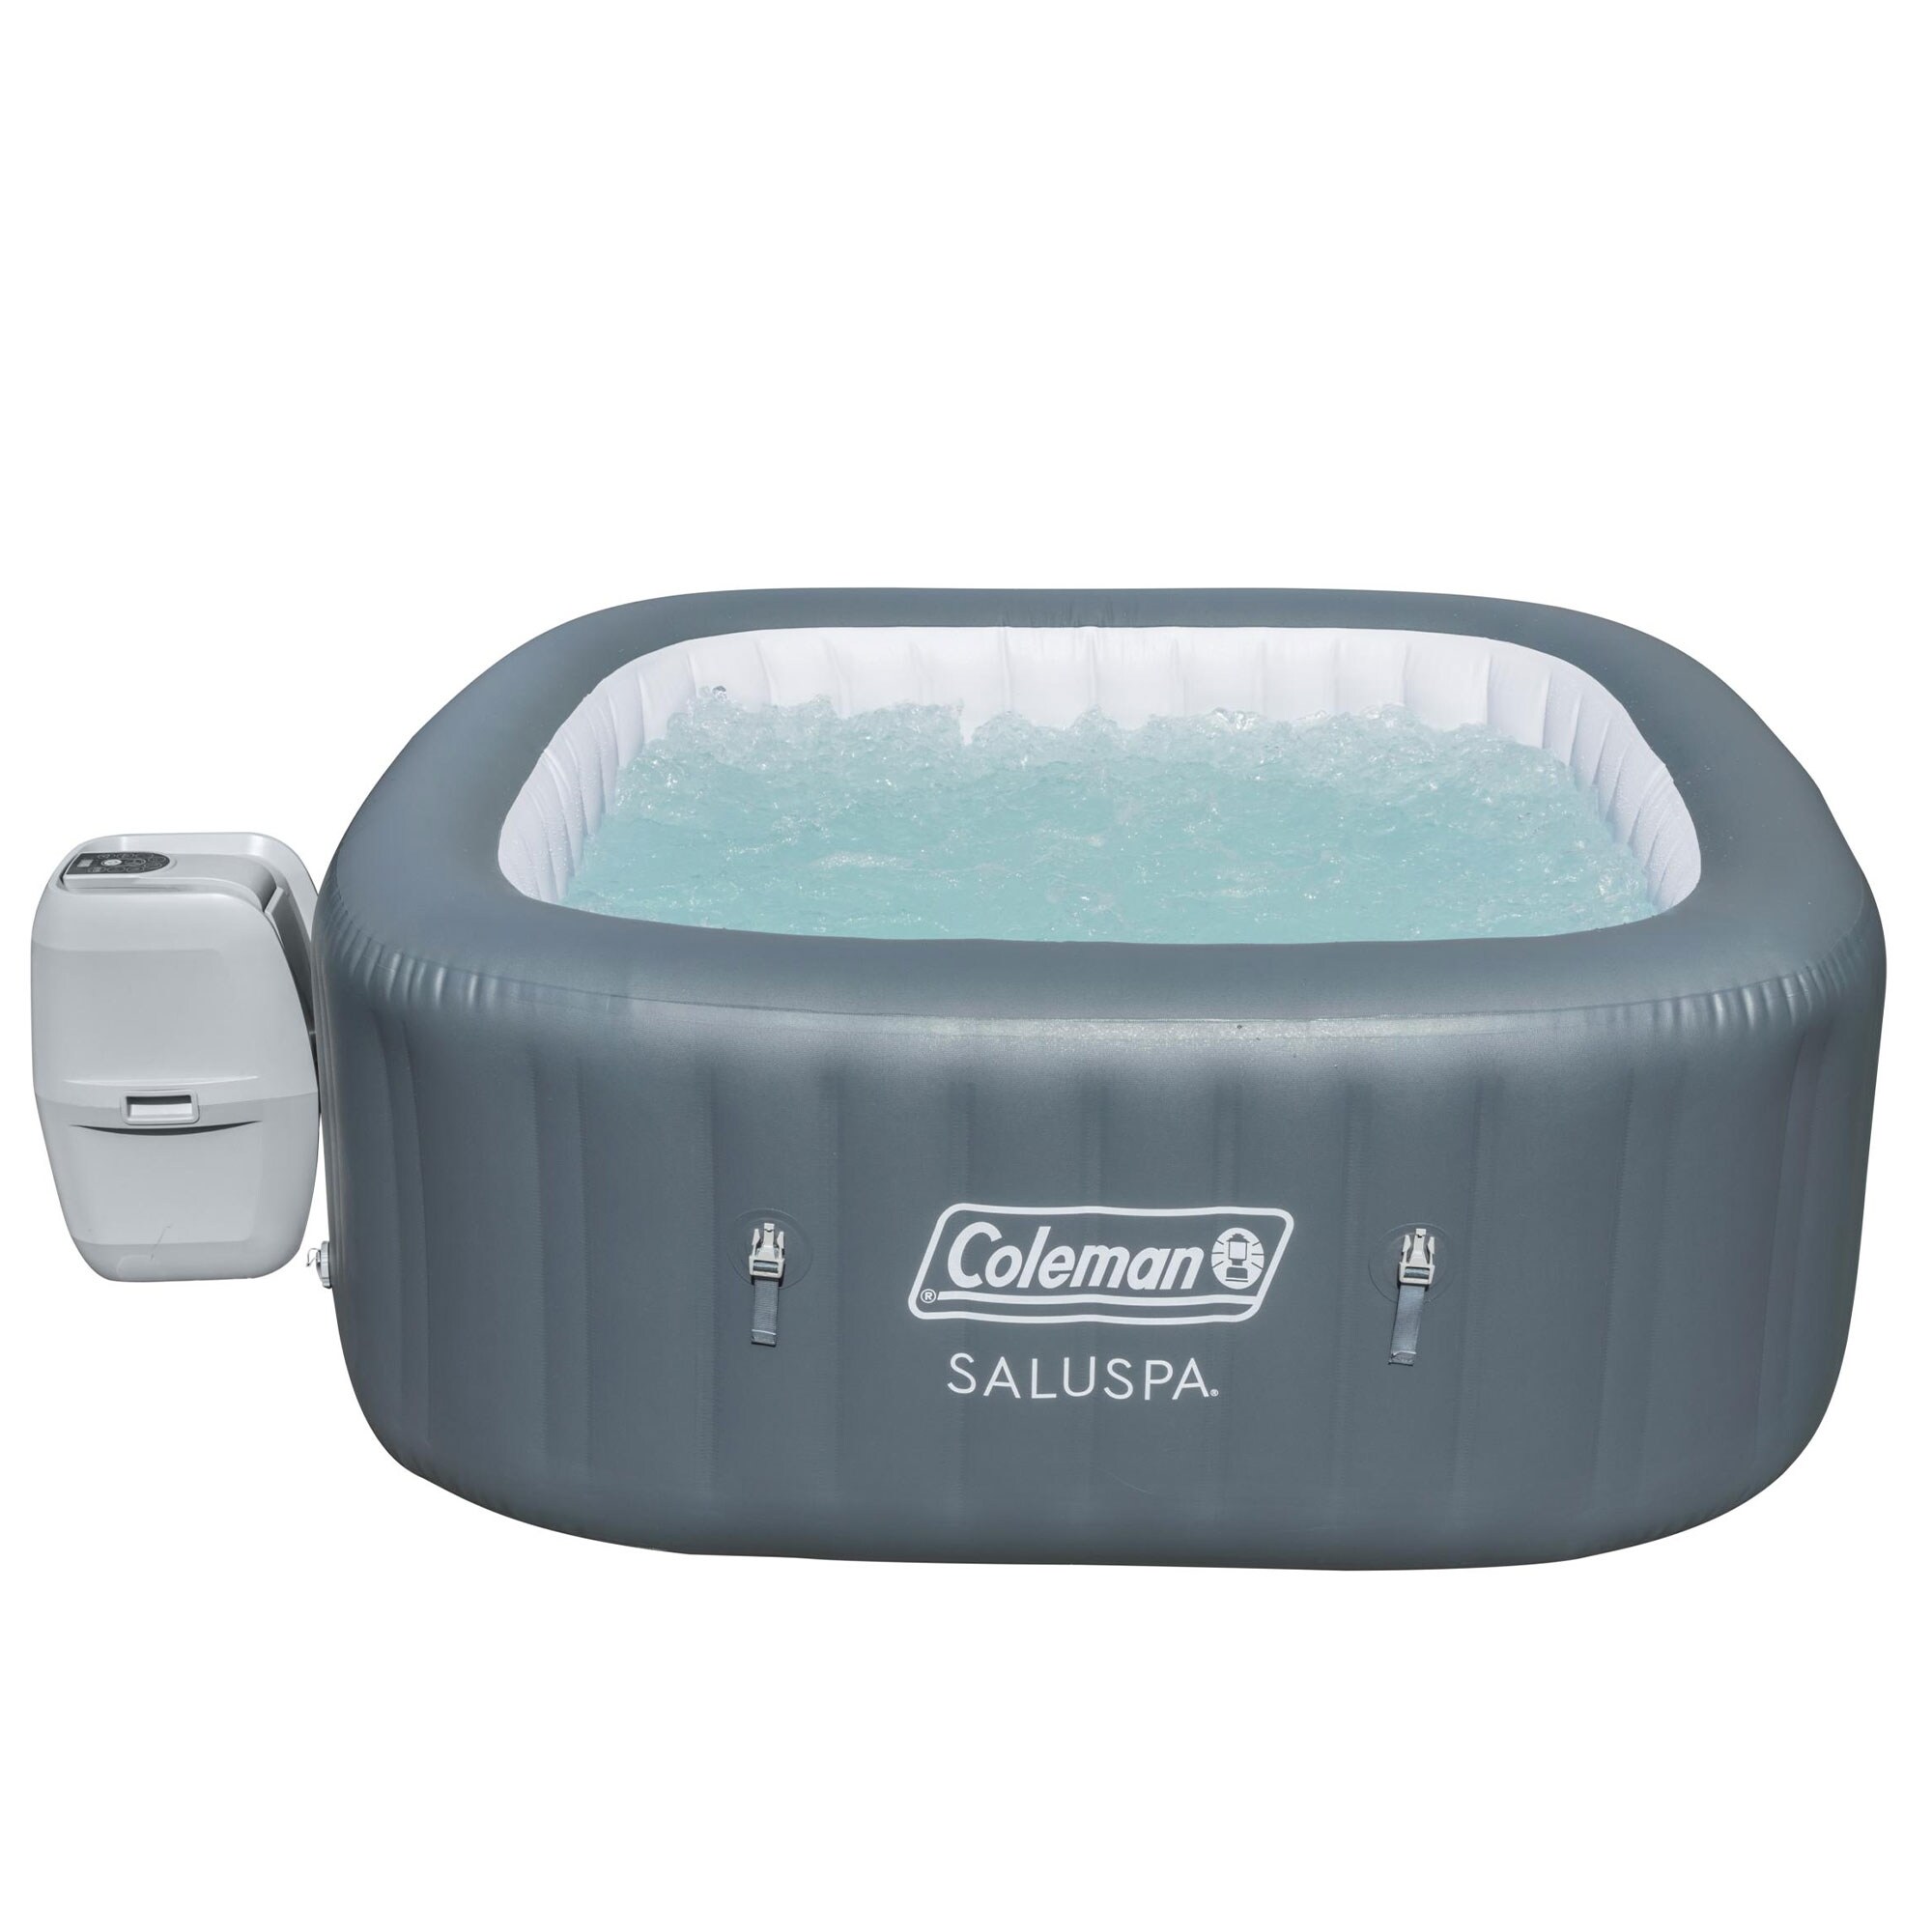 https://ak1.ostkcdn.com/images/products/is/images/direct/c8abb2d91e7a0fdc98e79601d408a9c8b4fe55ec/Coleman-SaluSpa-6-Person-Inflatable-Squared-Hot-Tub-Spa-with-114-AirJets%2C-Grey.jpg